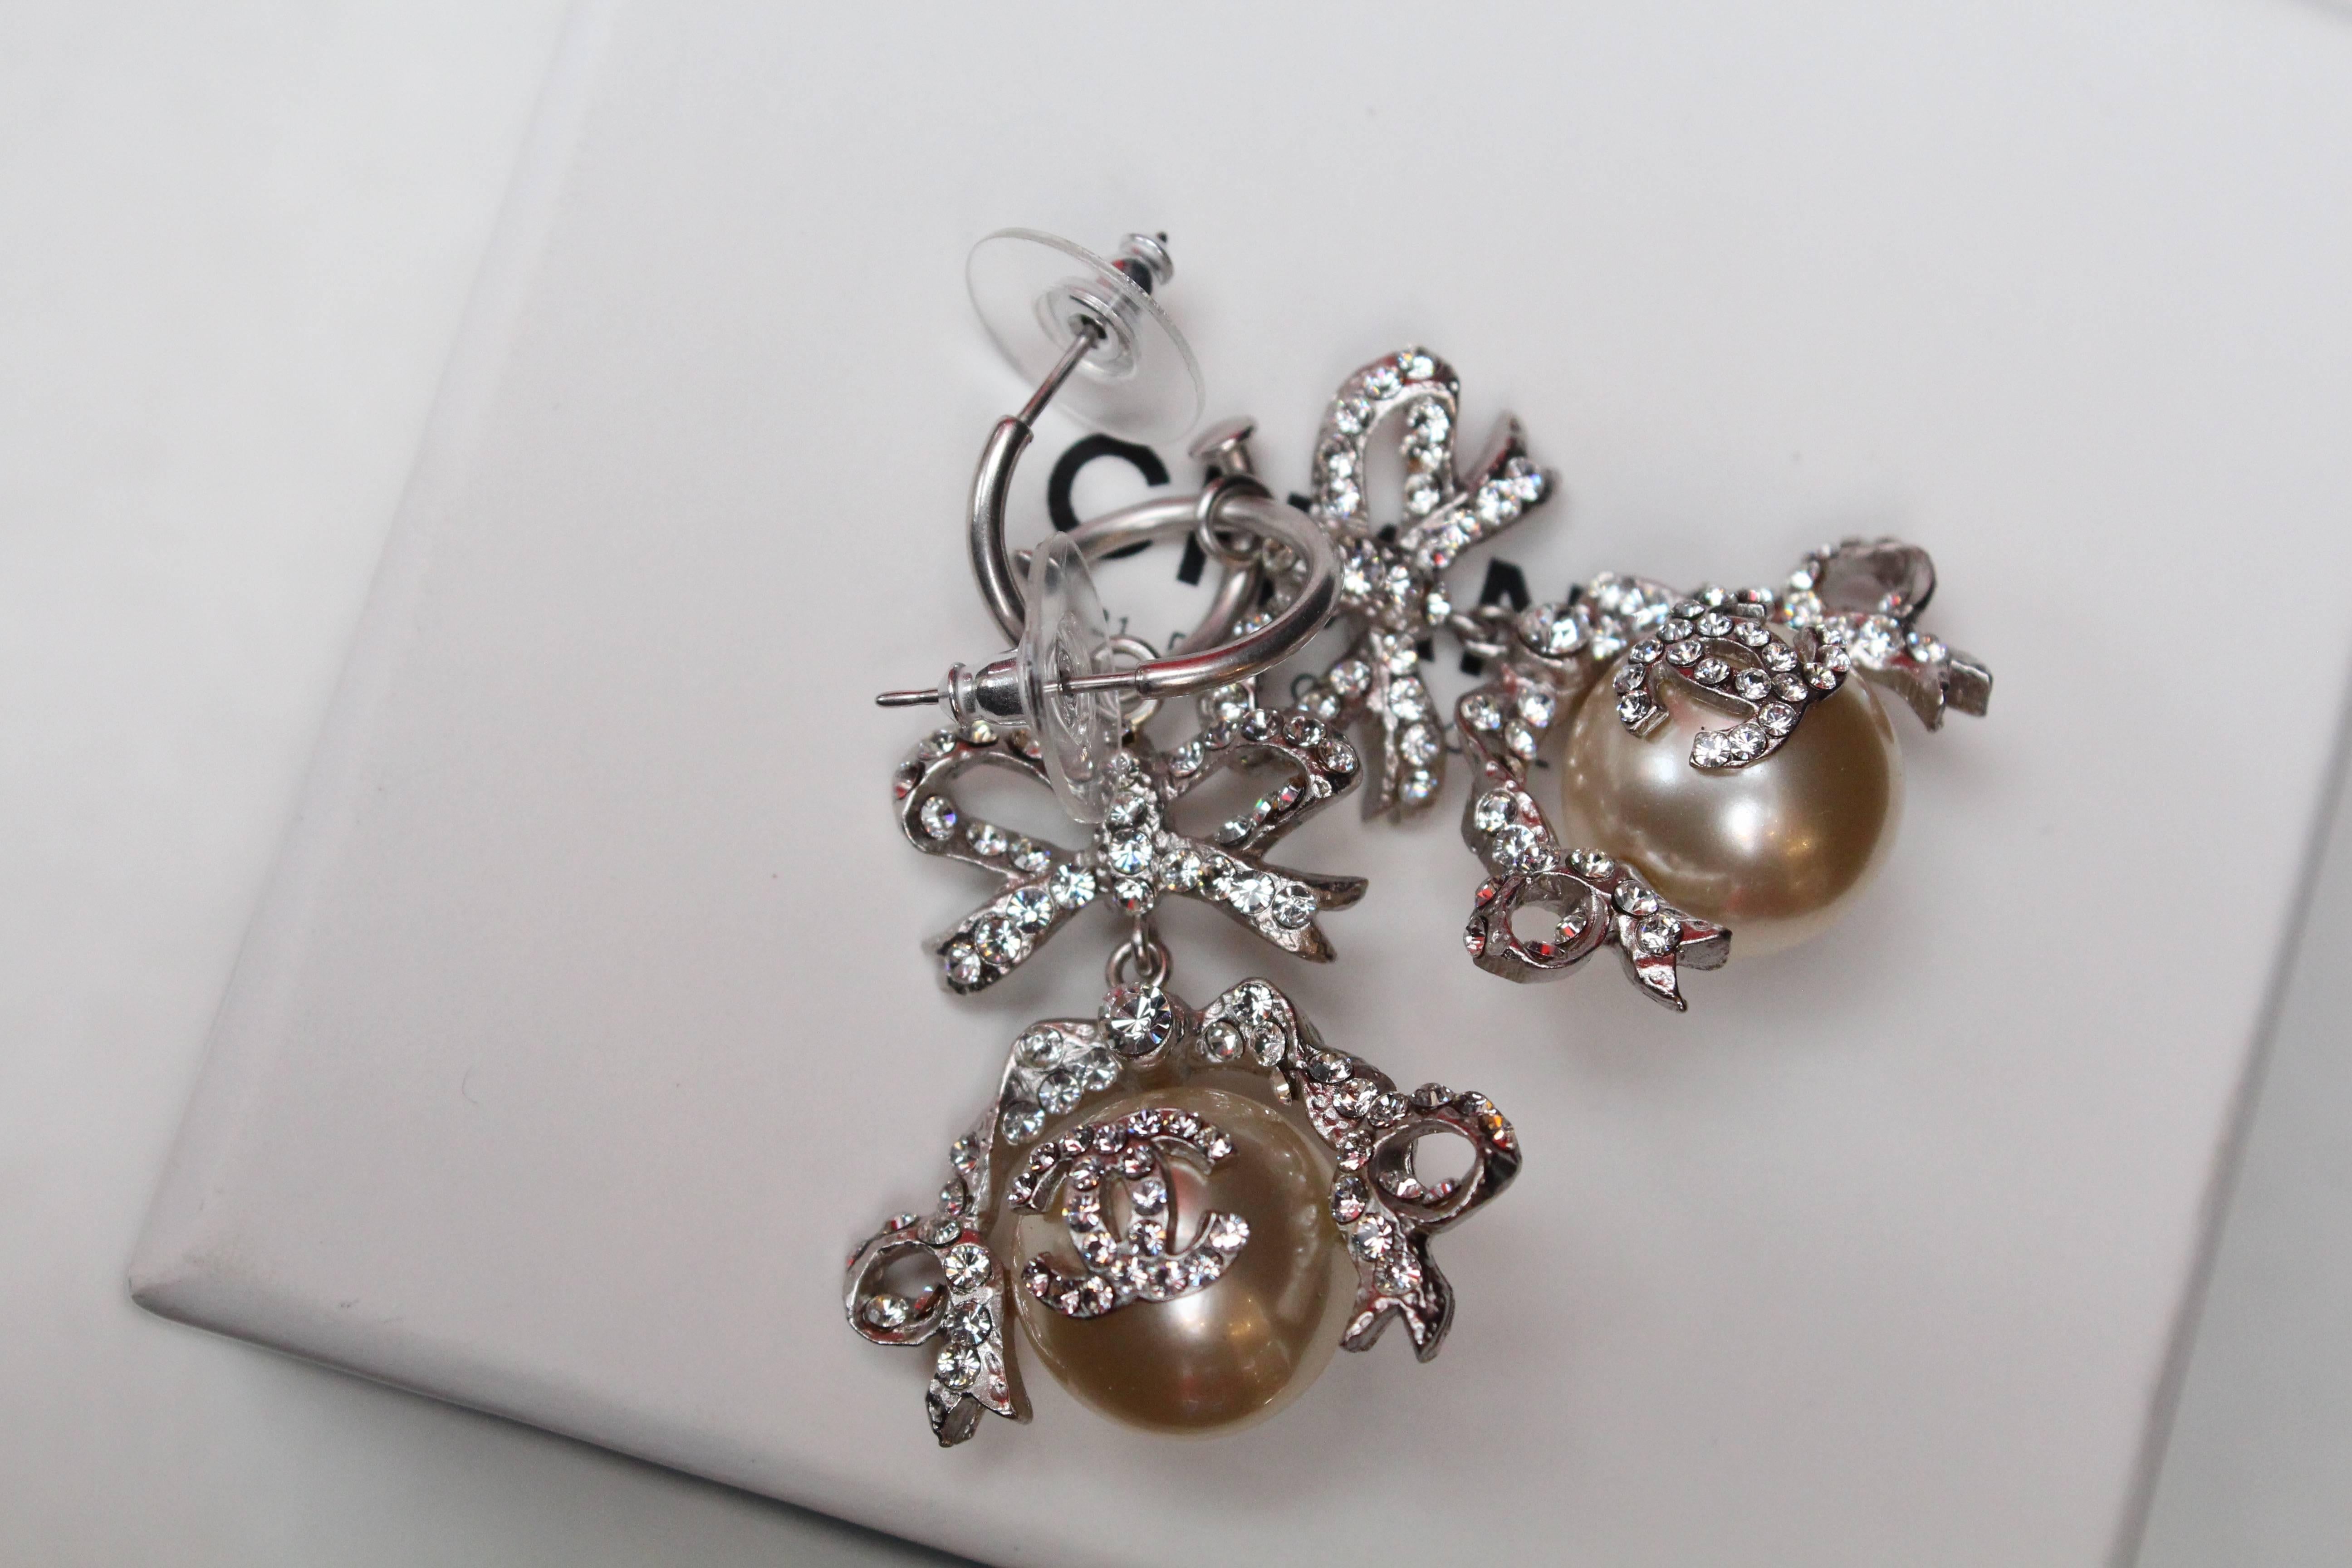 Women's 2004 Chanel gorgeous earrings representing a bow paved with rhinestones